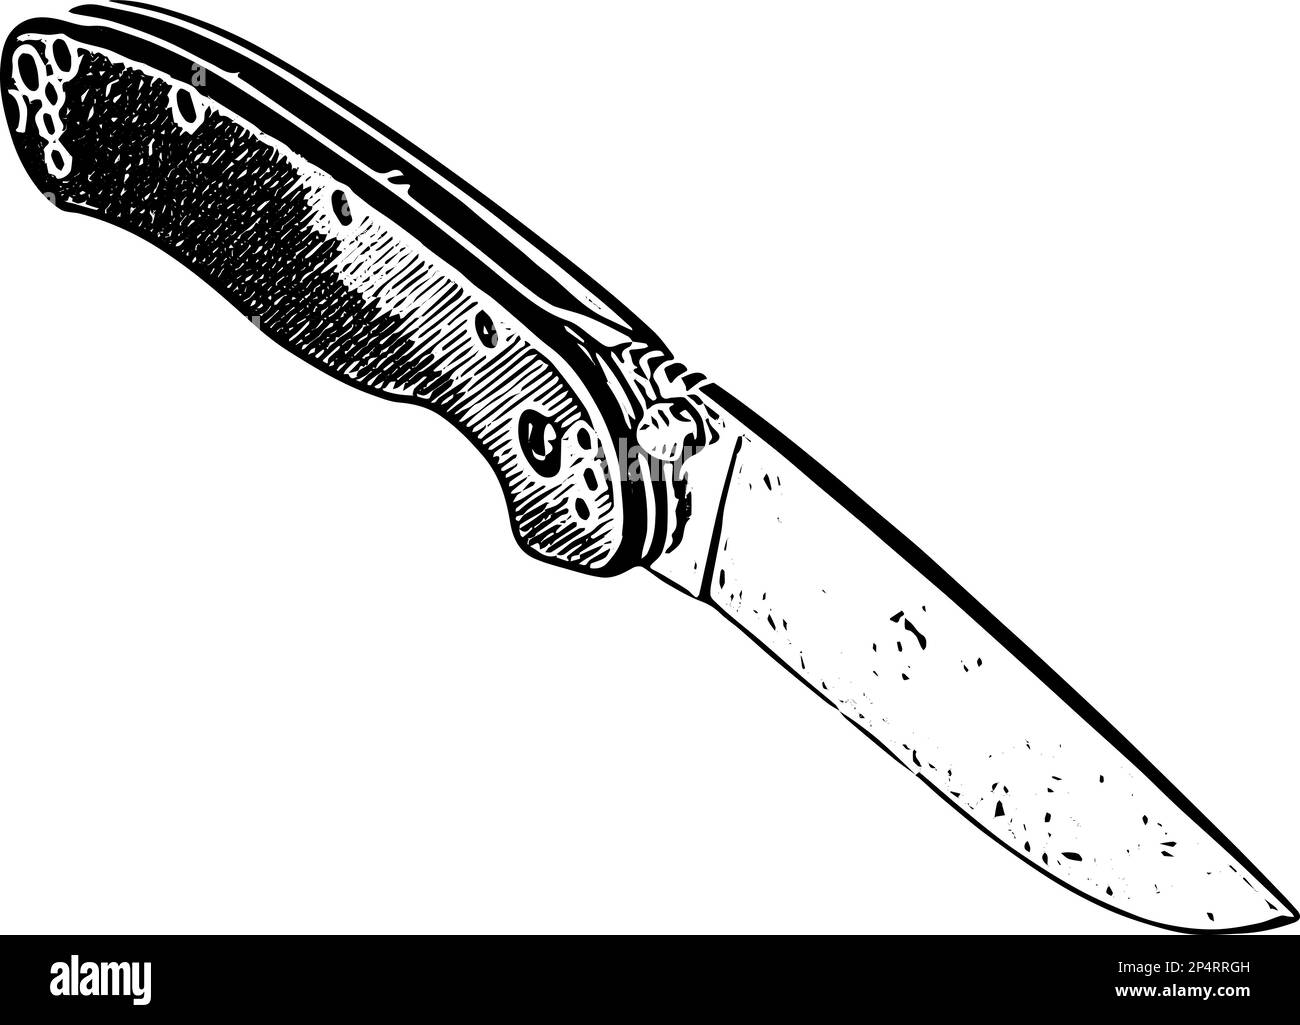 920 Drawing Of Pocket Knife Stock Photos Pictures  RoyaltyFree Images   iStock